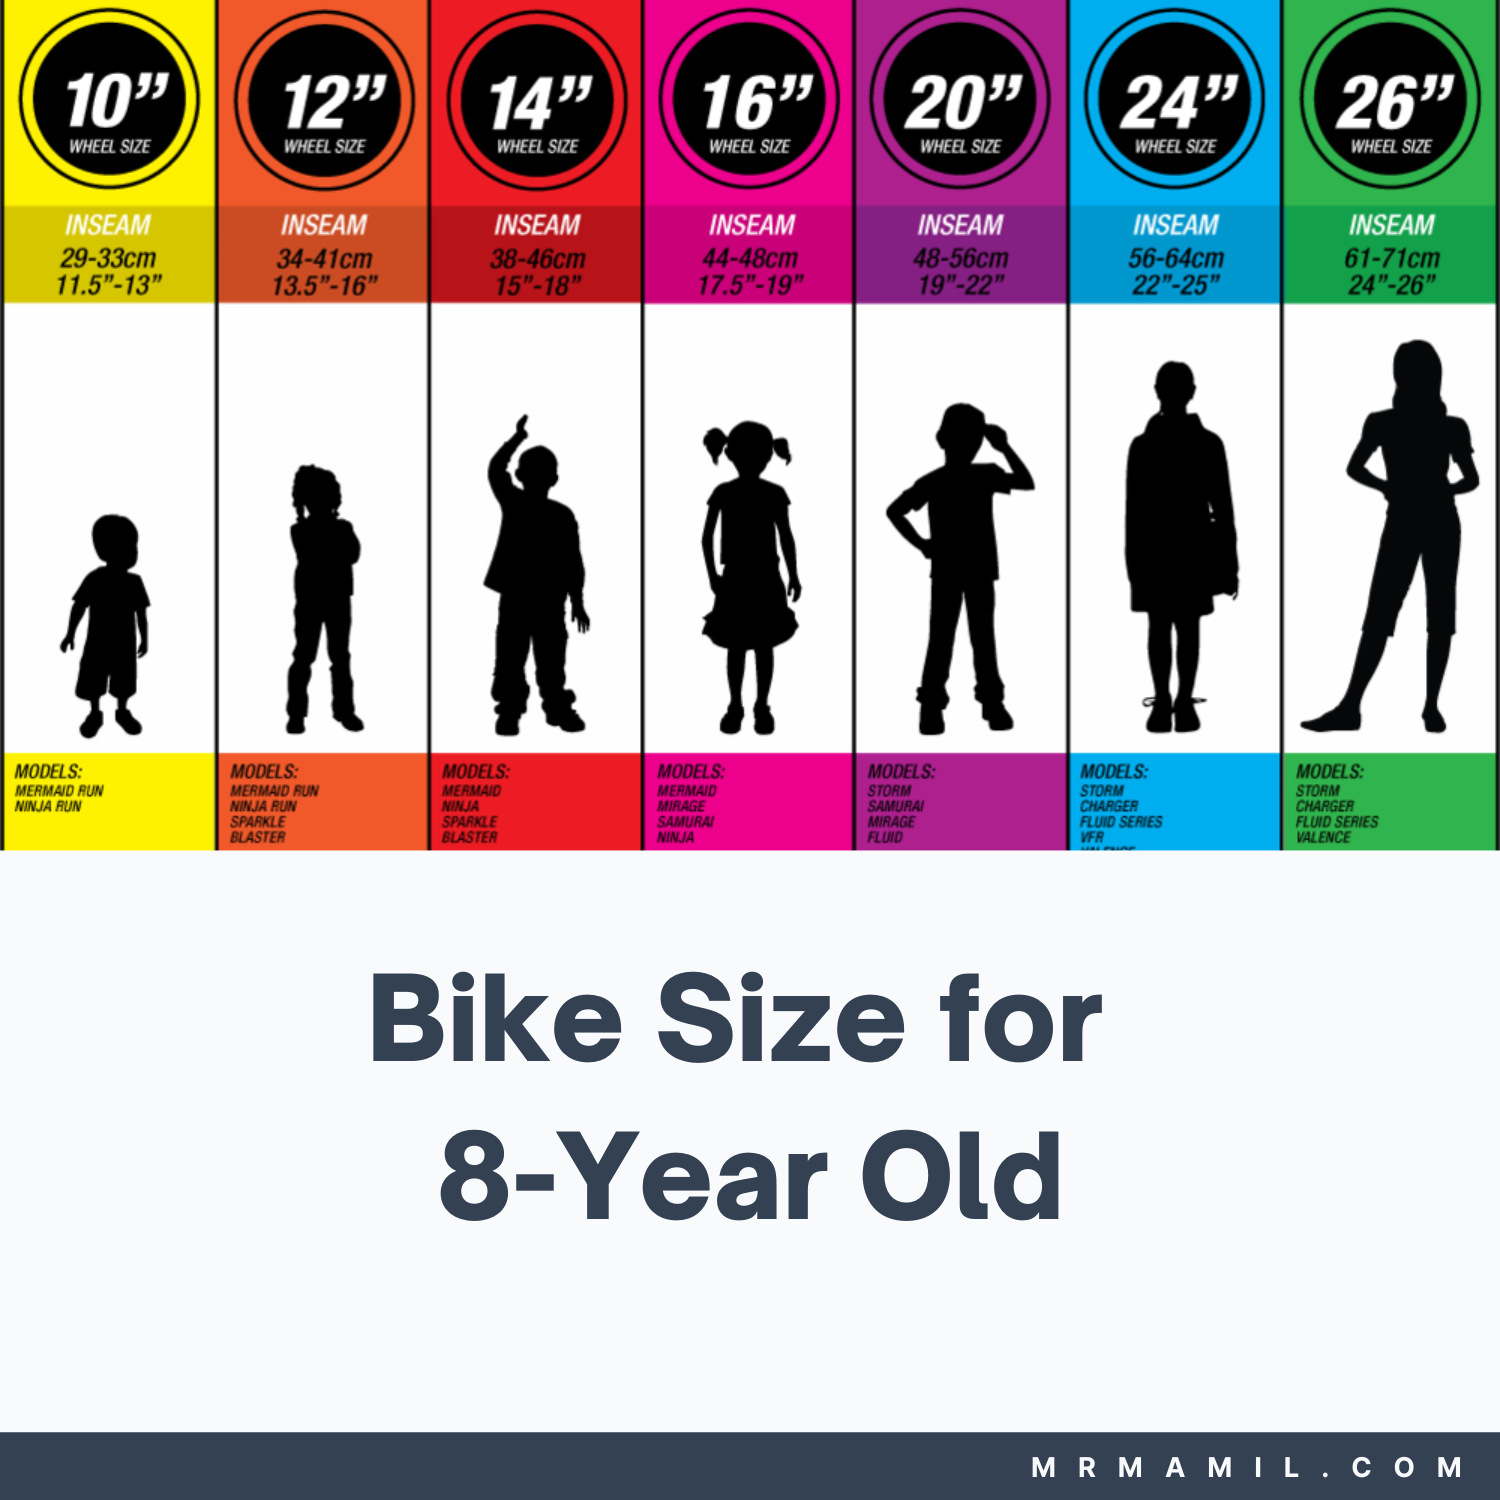 Bike Size for 8 Year Old